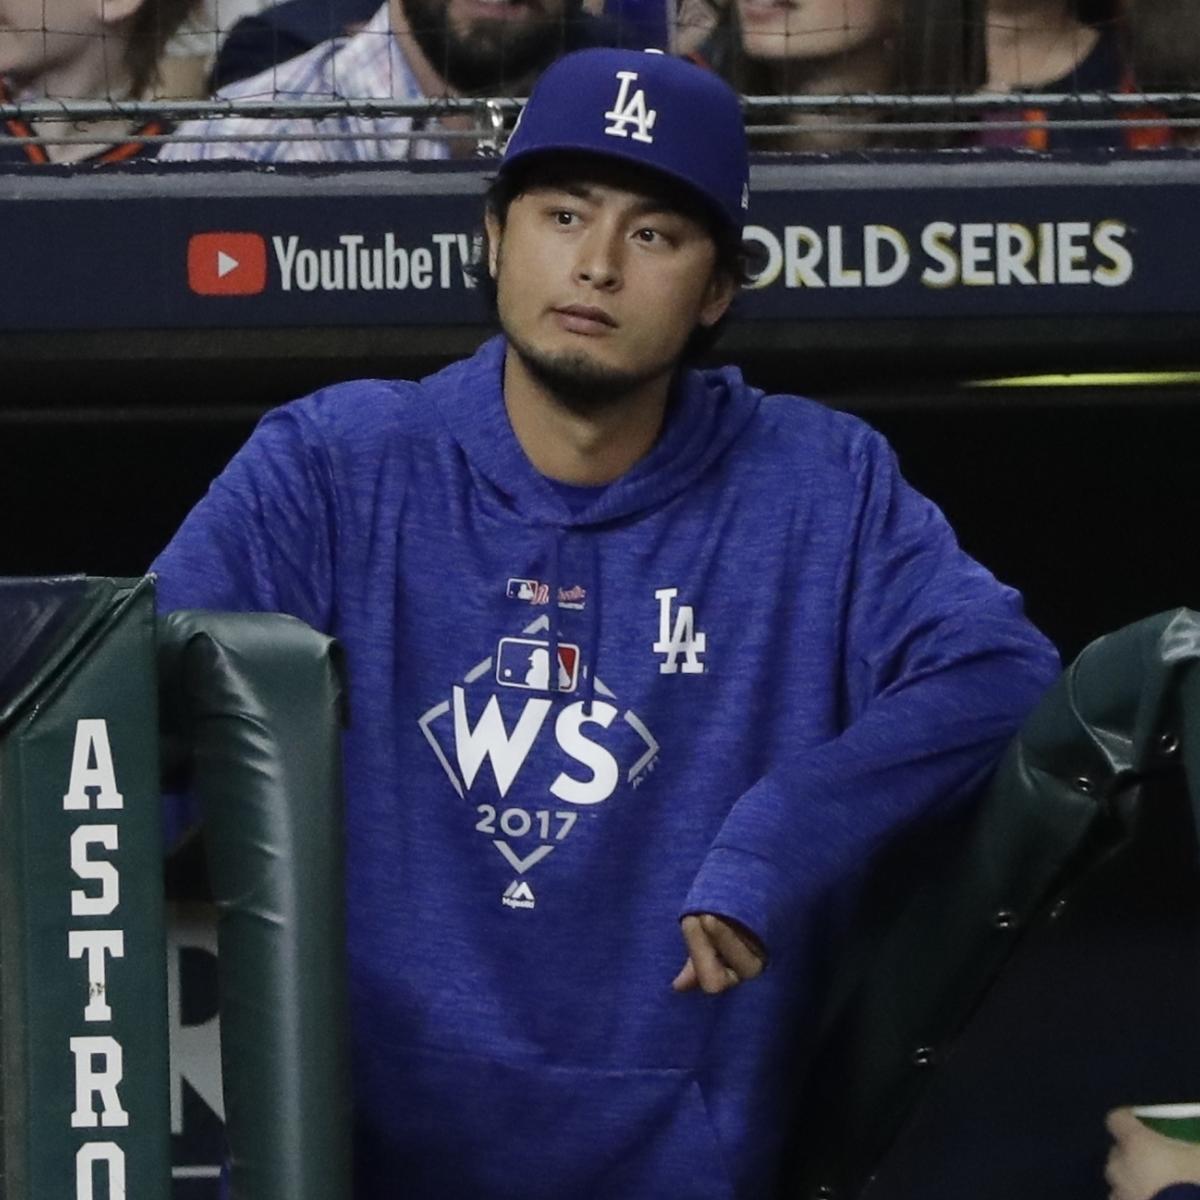 Yuli Gurriel faced relentless boos, and now here's Yu Darvish in Game 7 